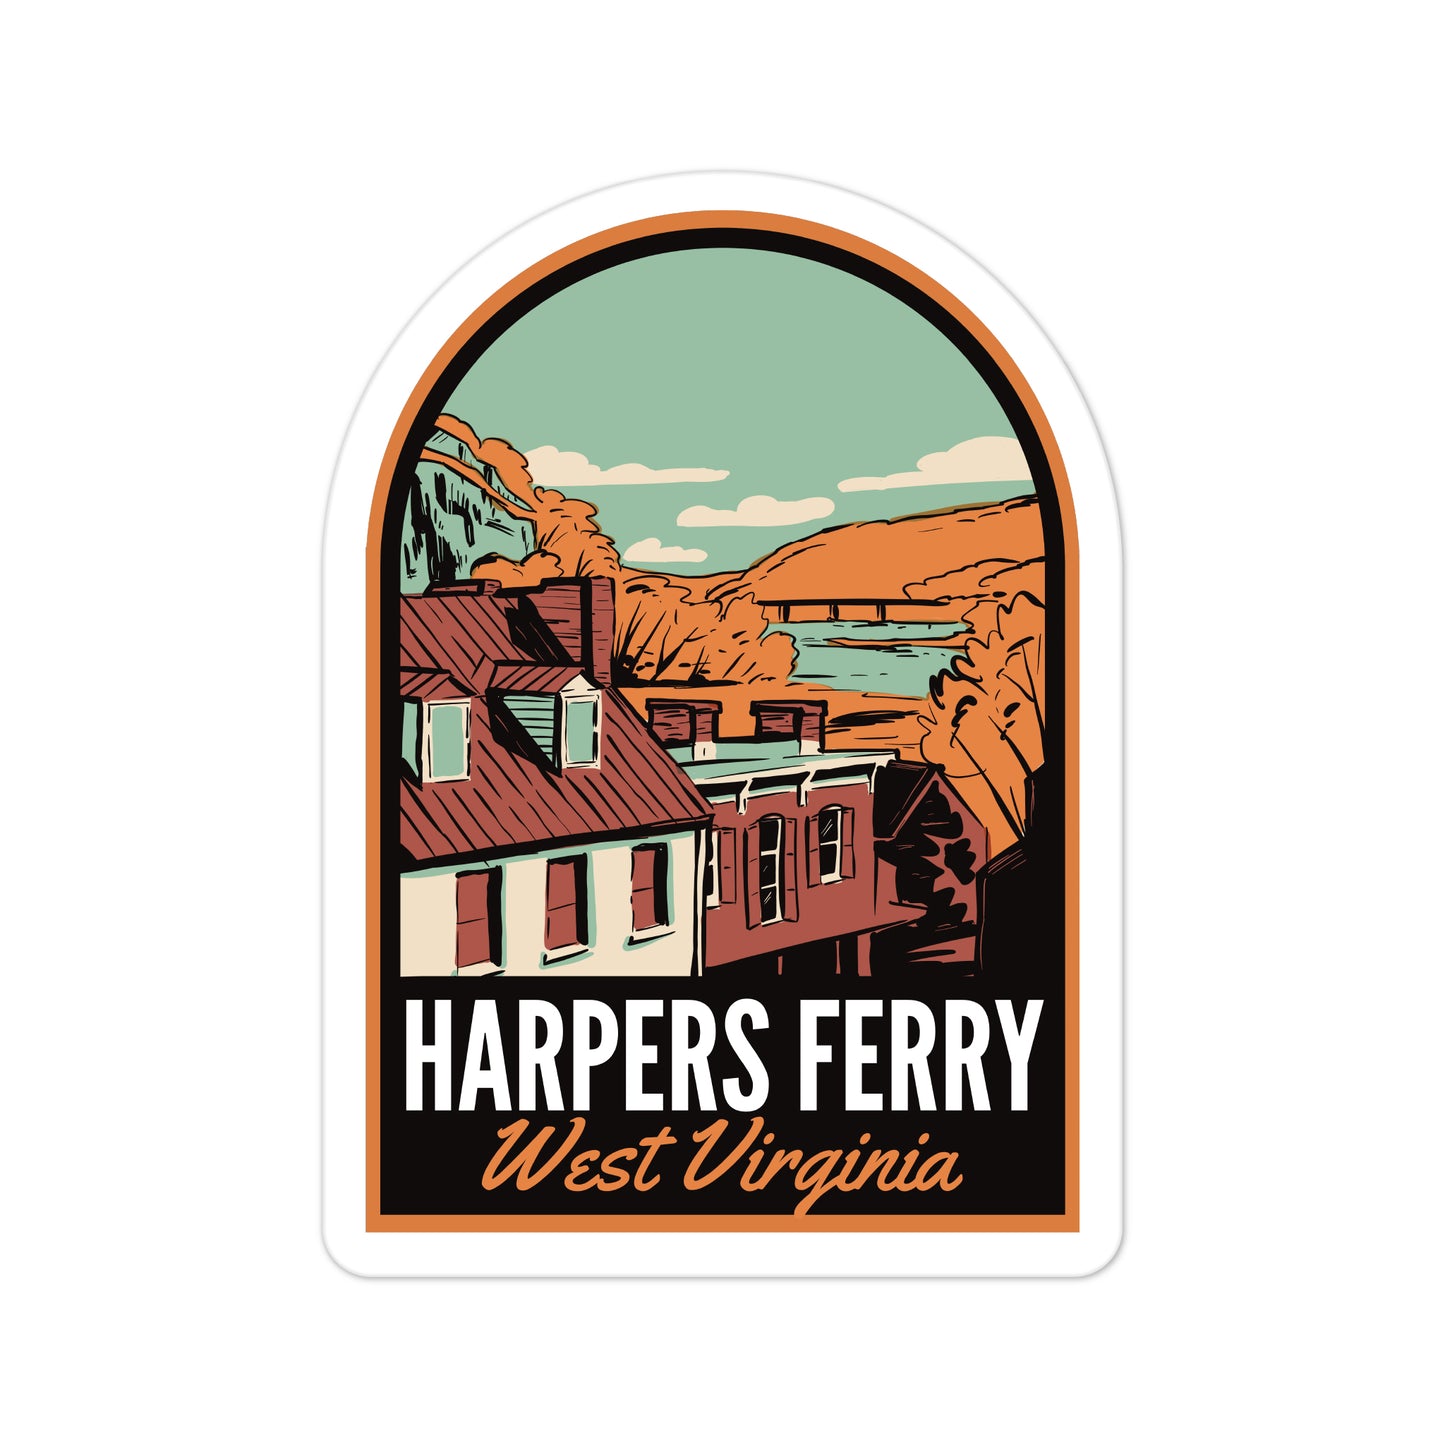 A sticker of Harpers Ferry West Virginia